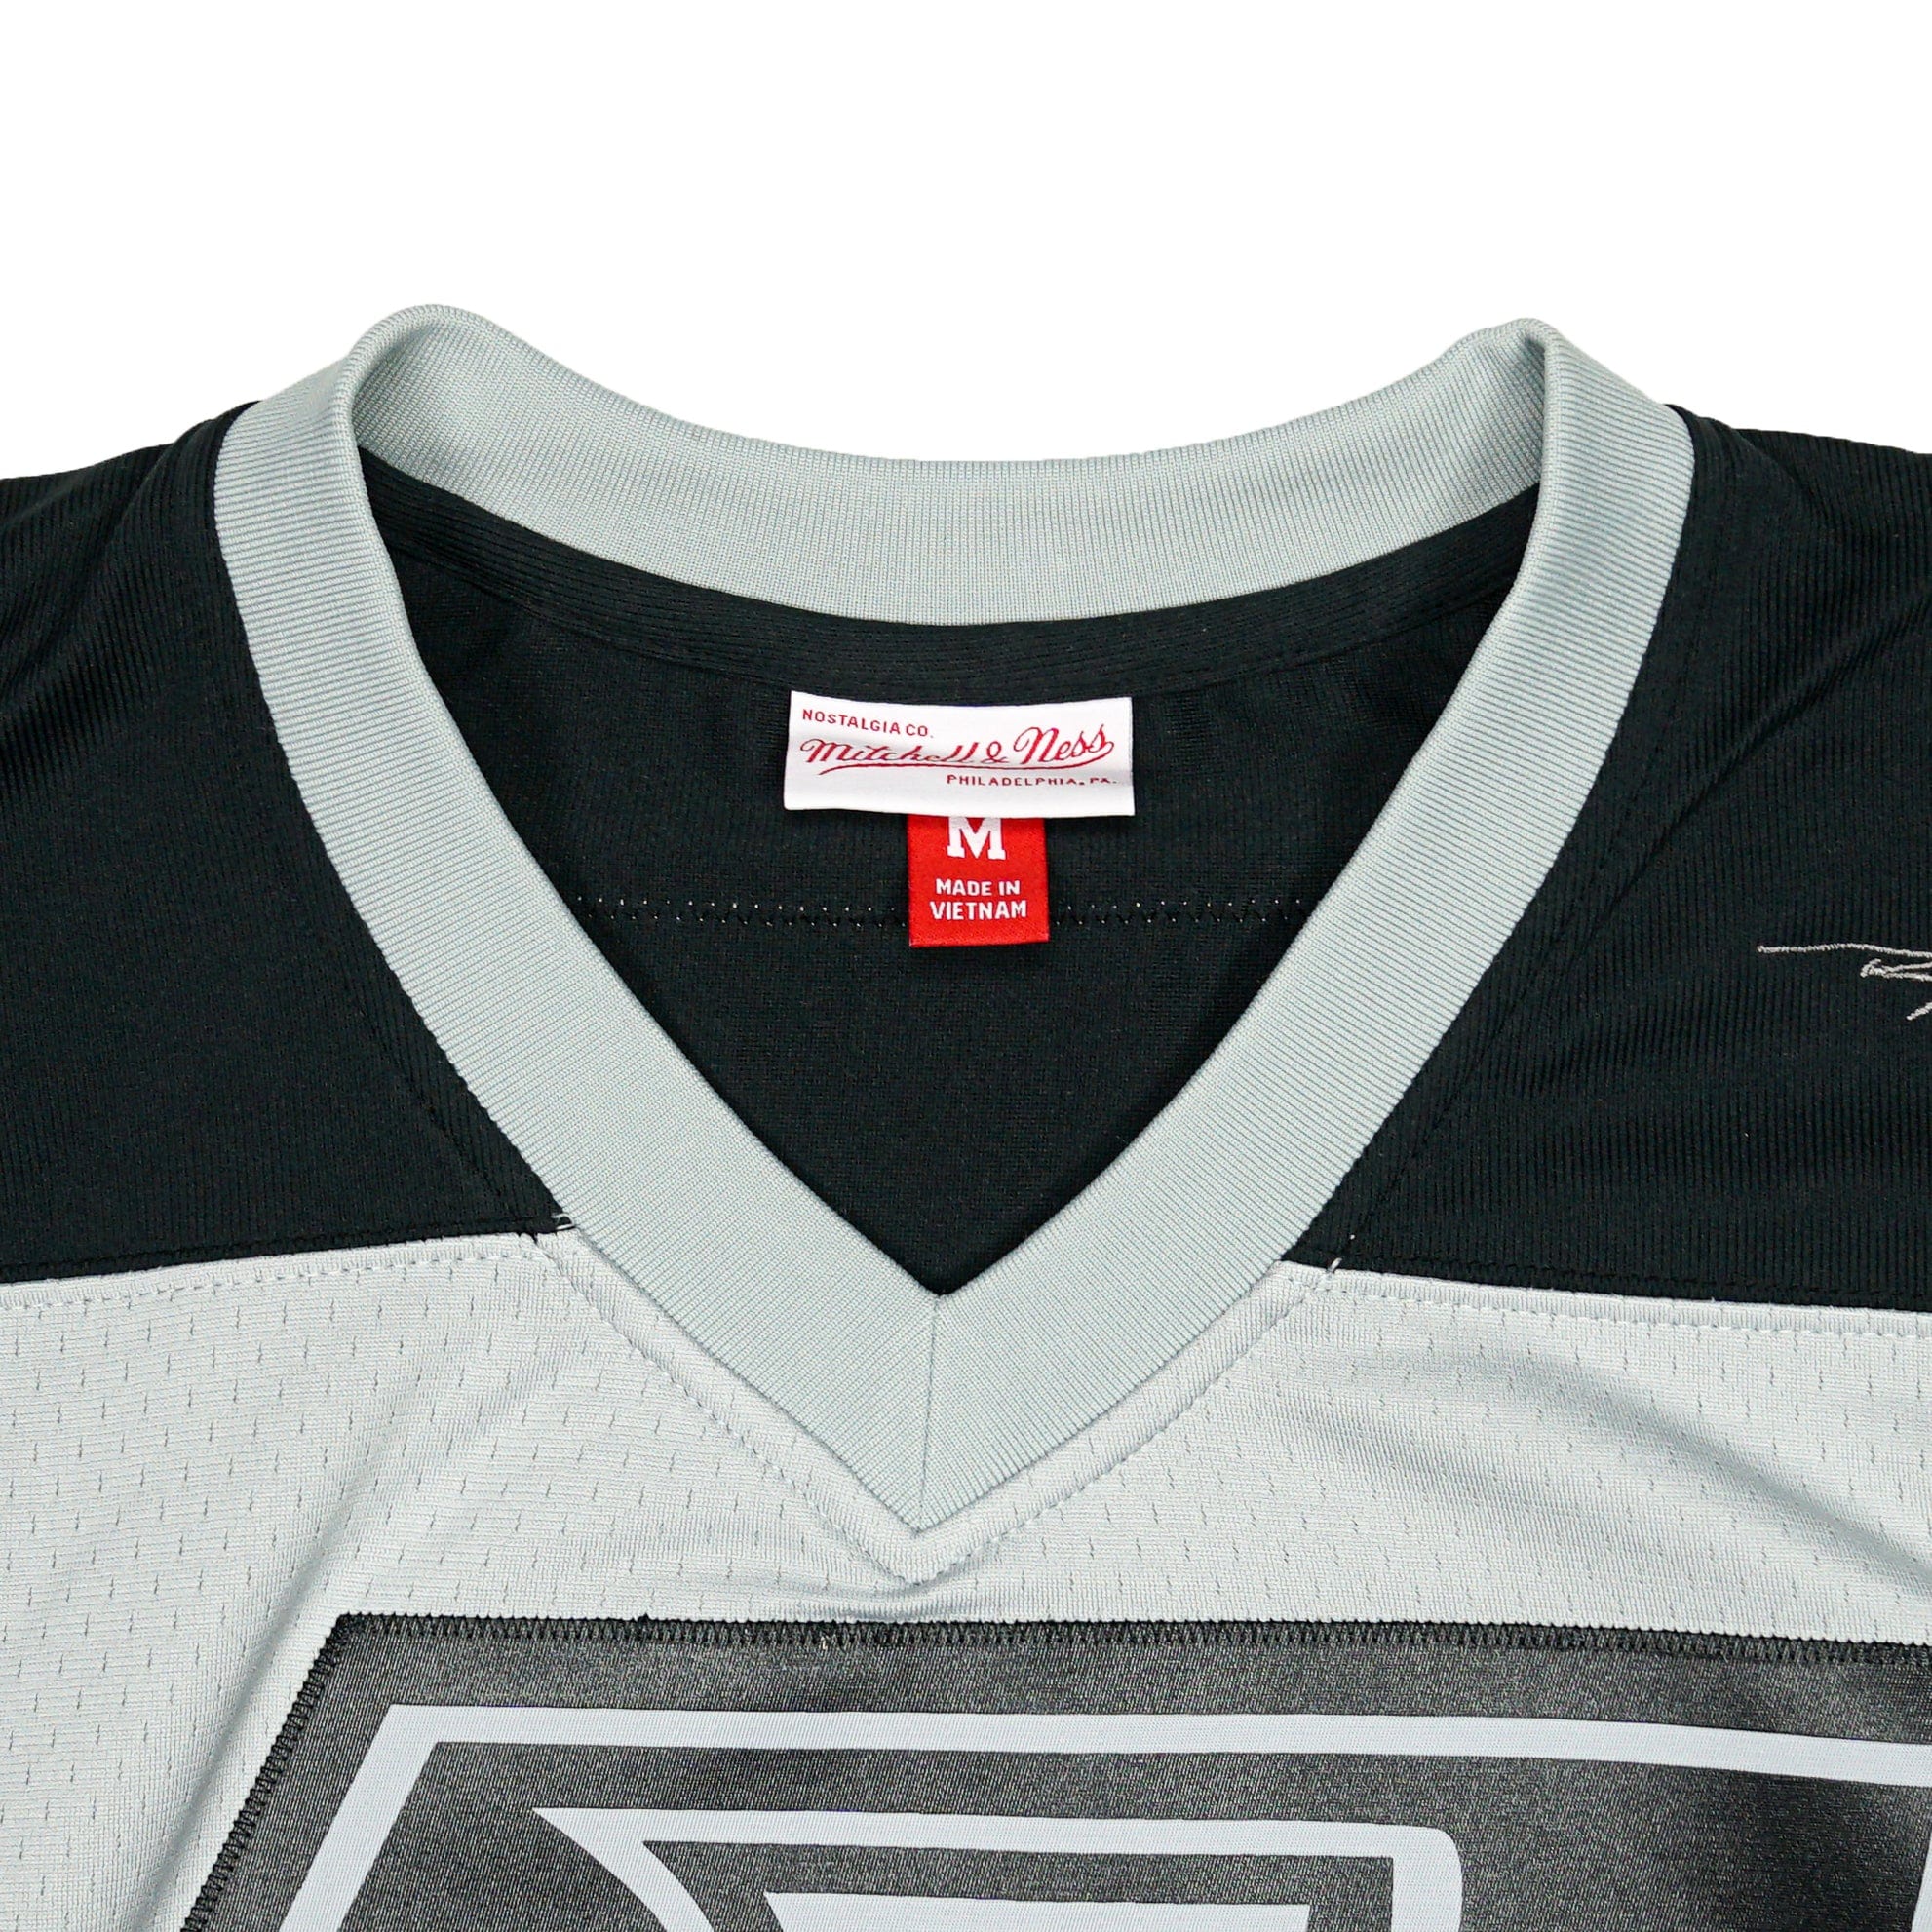 50th Anniversary of Hip Hop Ruff Ryders Football Jersey in silver and black - Mitchell & Ness - State Of Flux